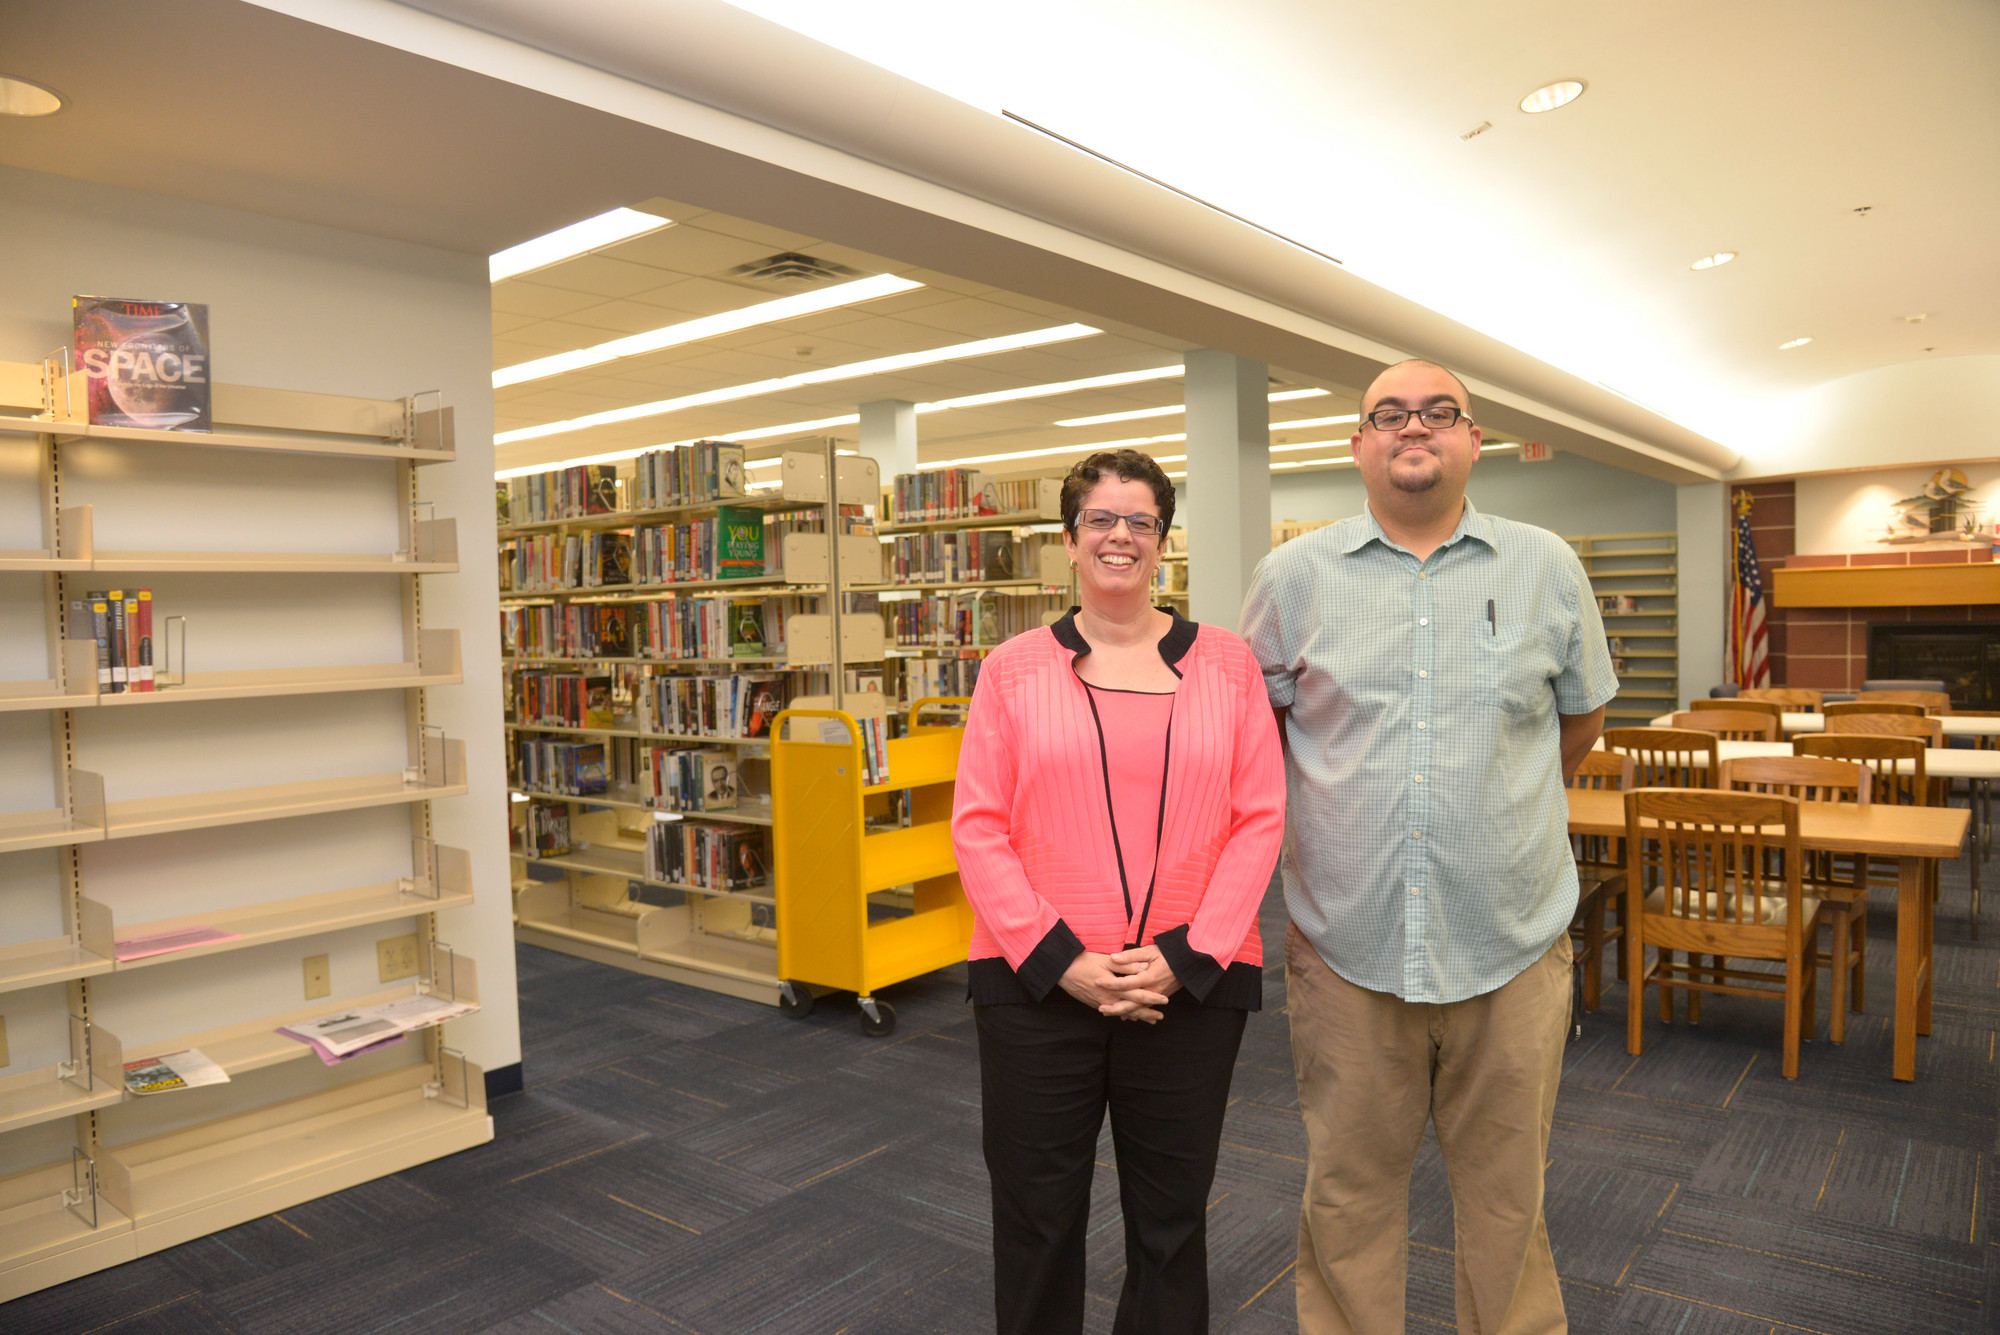 Library director Jessica Koenig and Antonio Cuneo, a library aide  who has worked at Library since he was 16.